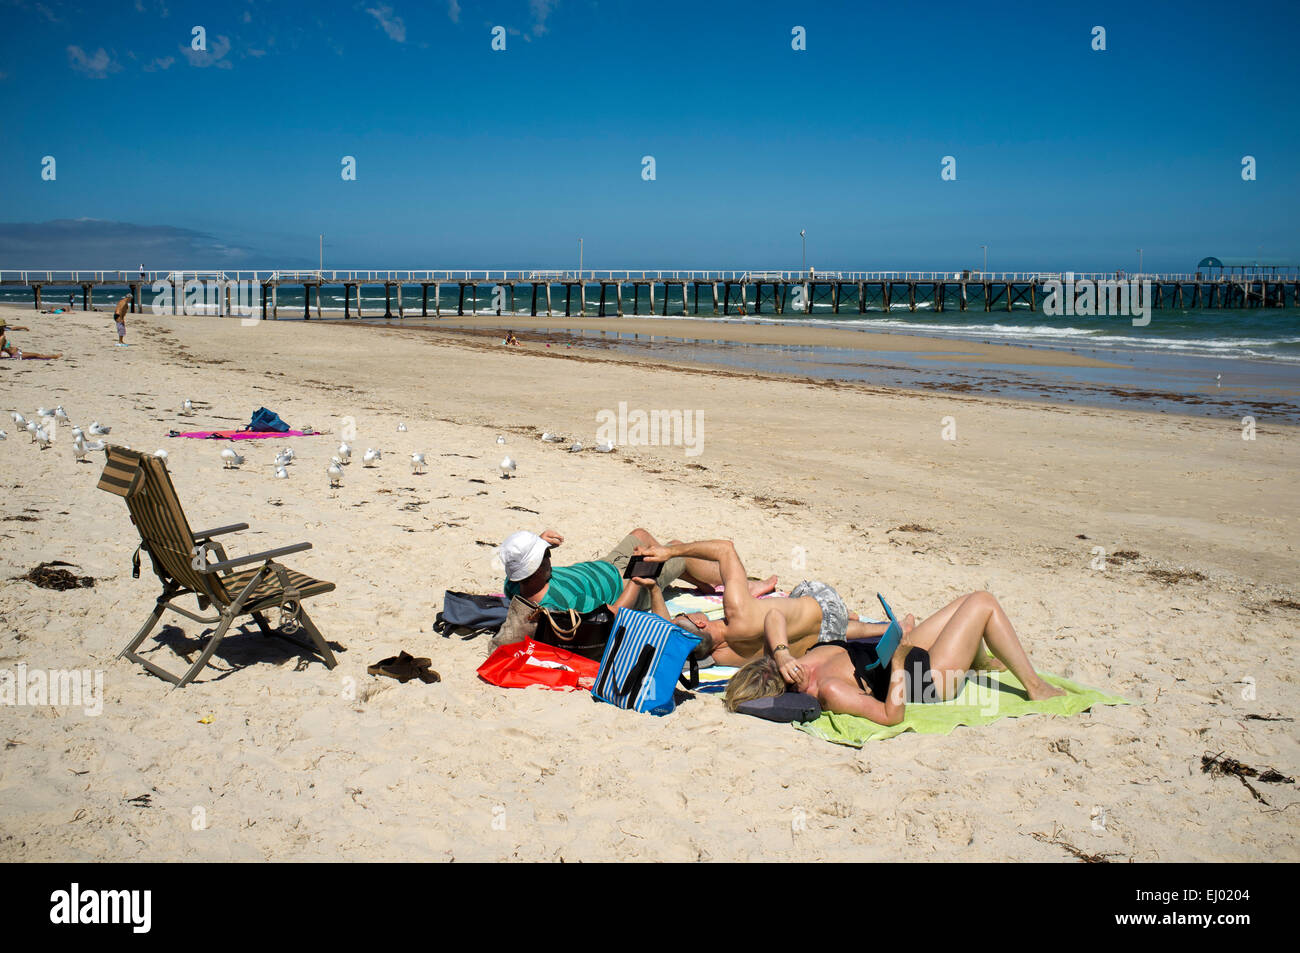 Adelaide Austalia. 19th March 2015. People took advantage of the warm weather by going to the beach on an autumn day as temperatures remained above average. Credit:  amer ghazzal/Alamy Live News Stock Photo